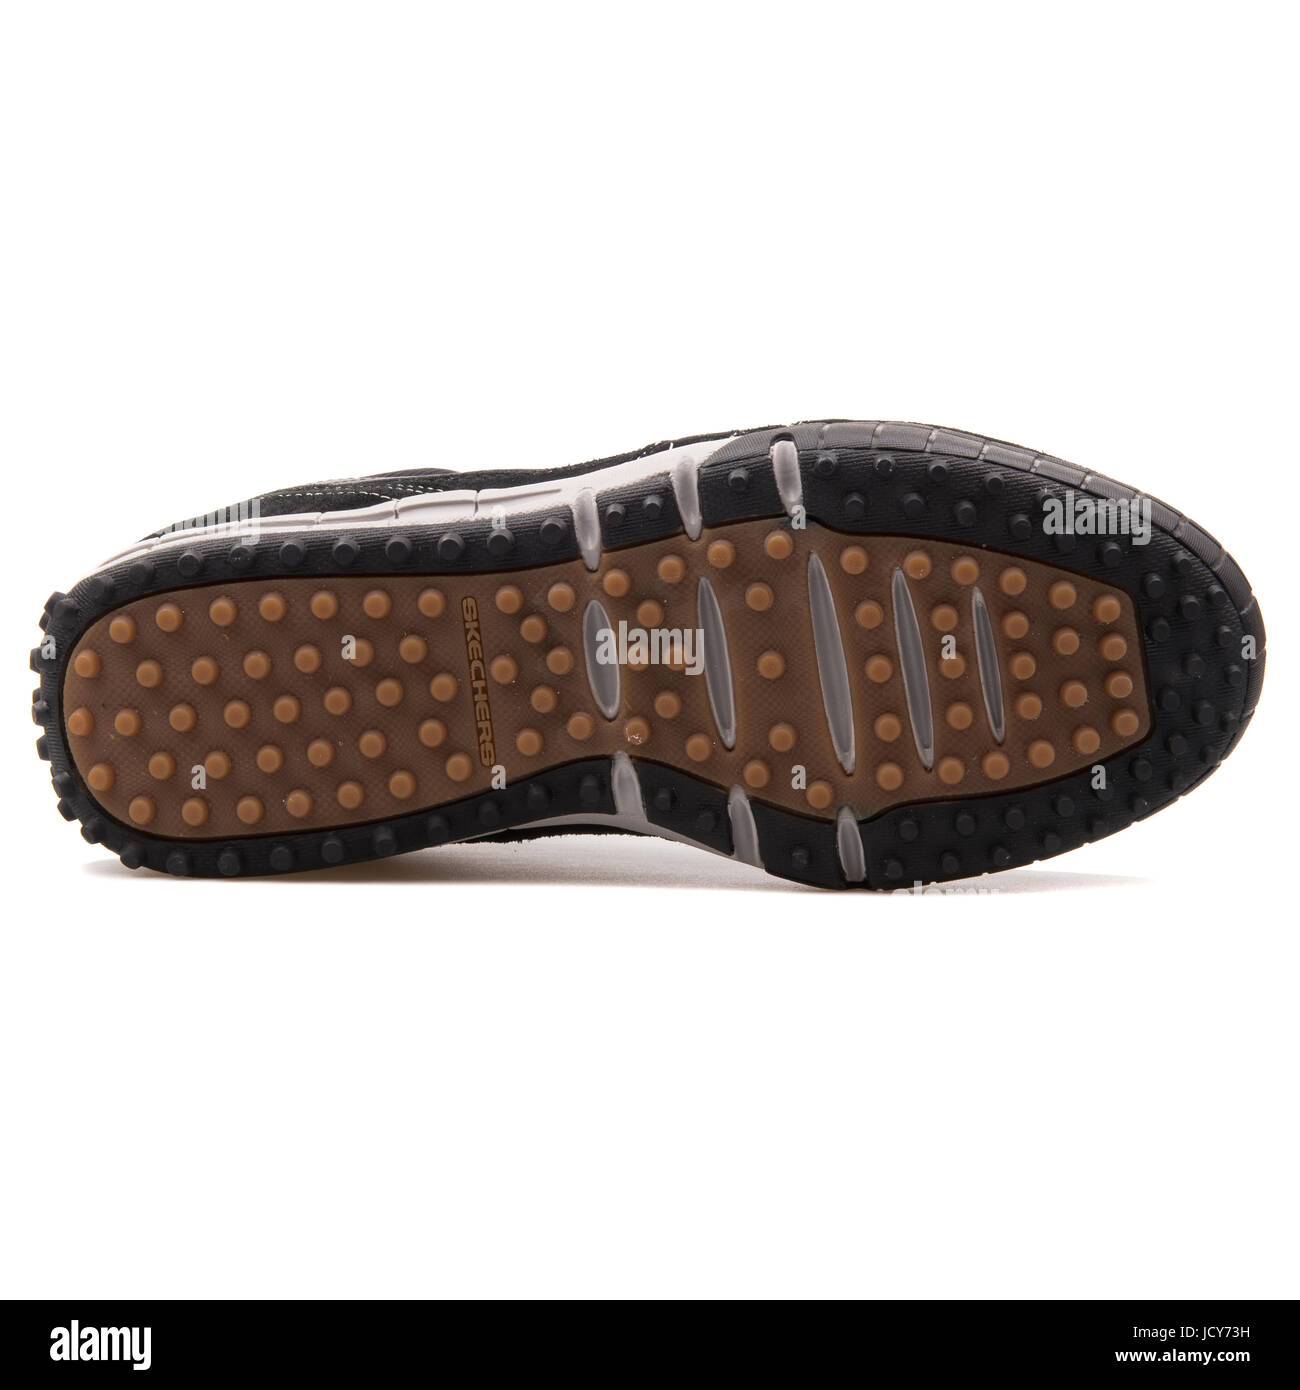 Skechers Floater Black and Grey Men's Sneakers - 51328-BKGY Stock Photo -  Alamy